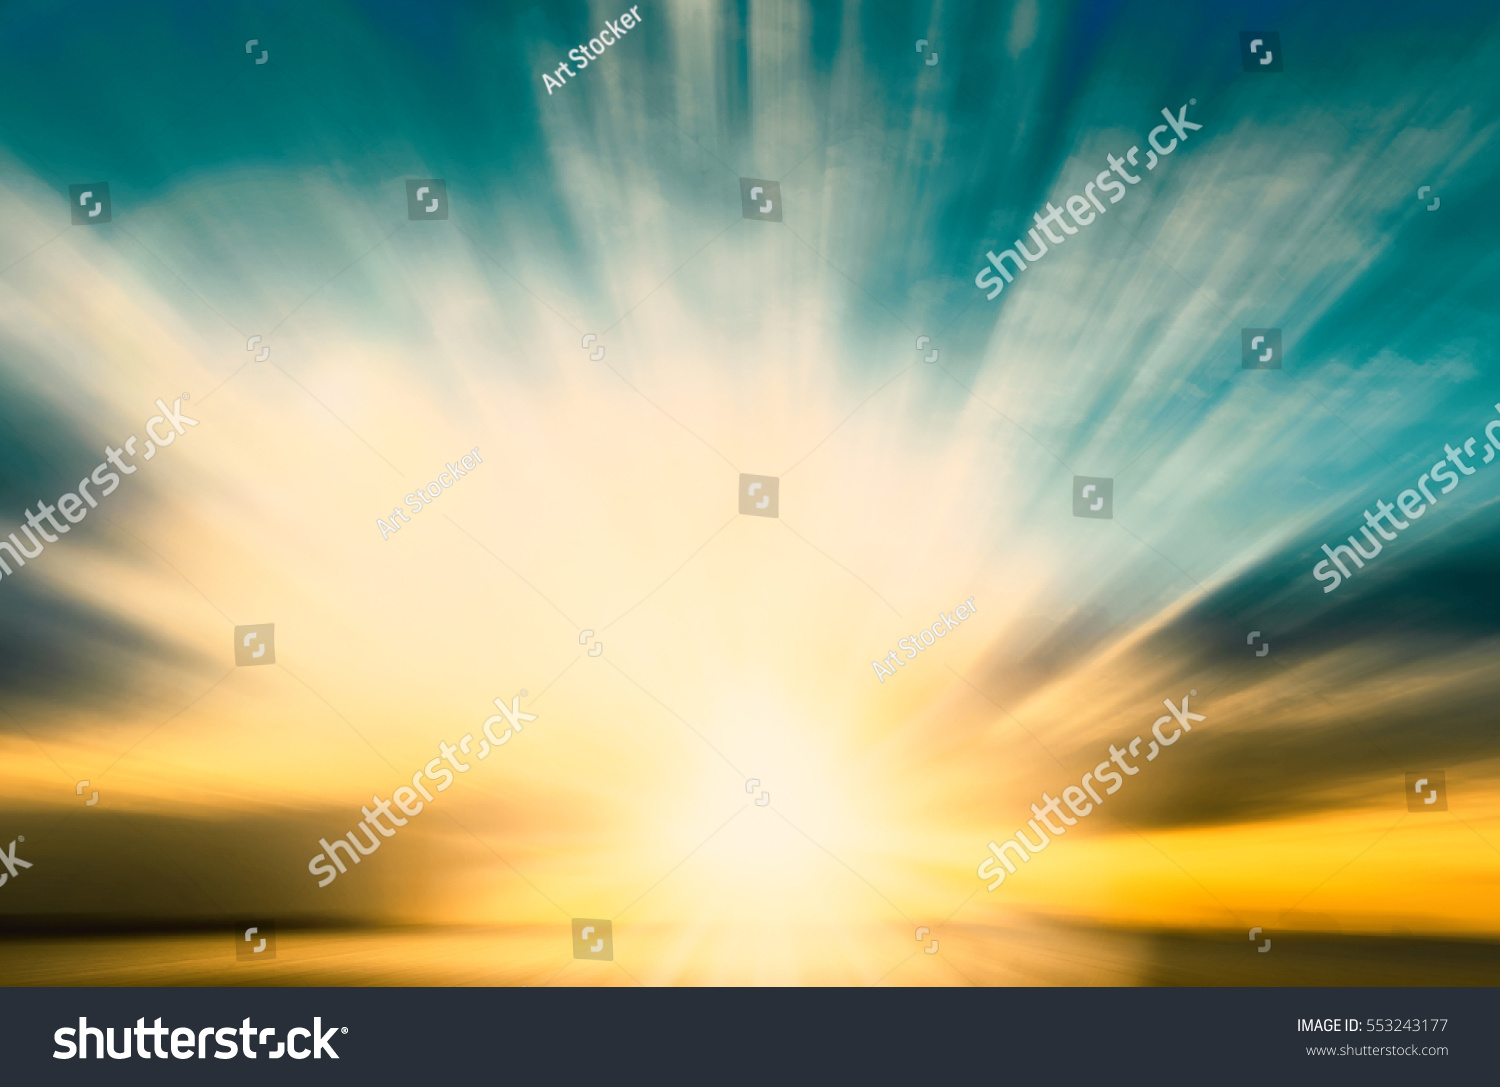 Magic blur bokeh nature morning sunshine on summer sky background concept - peaceful event christian religion, love holy spirit faith, people hope in easter, scenery of ramadan peace sunset technology #553243177